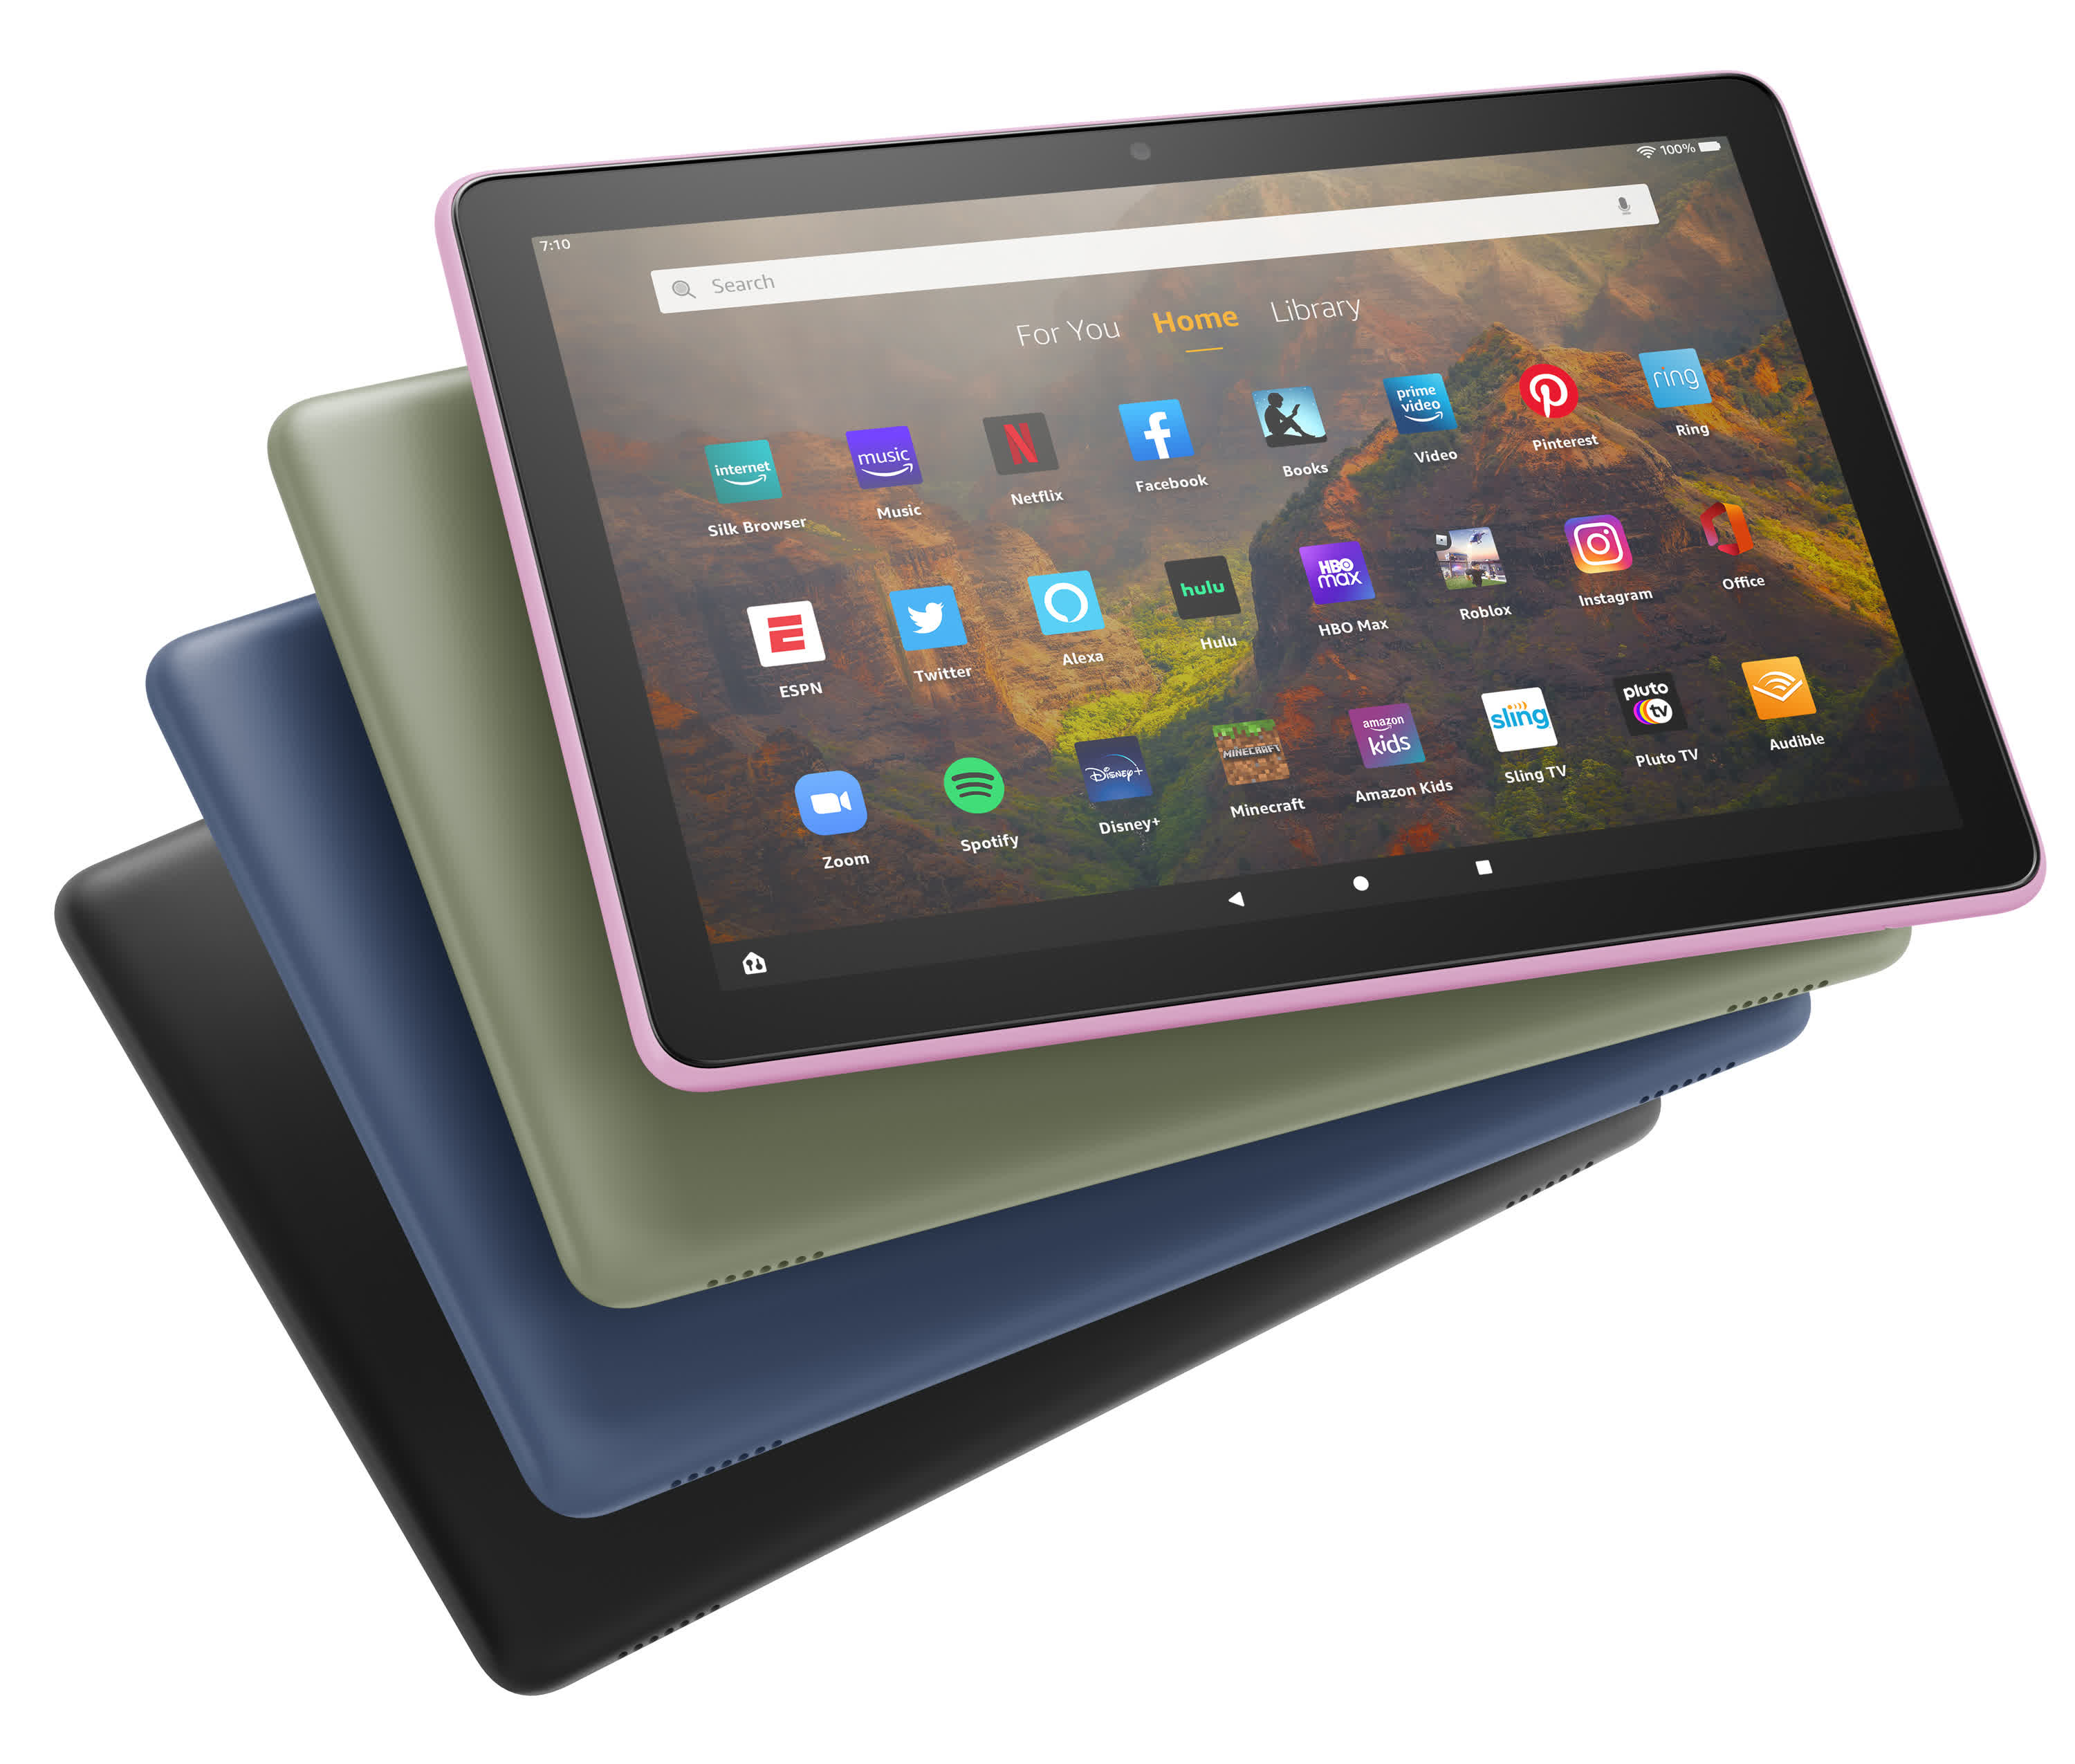 Amazon tablet lineup update brings new Fire HD 10, Fire Kids Pro, and Fire Kids 10 models